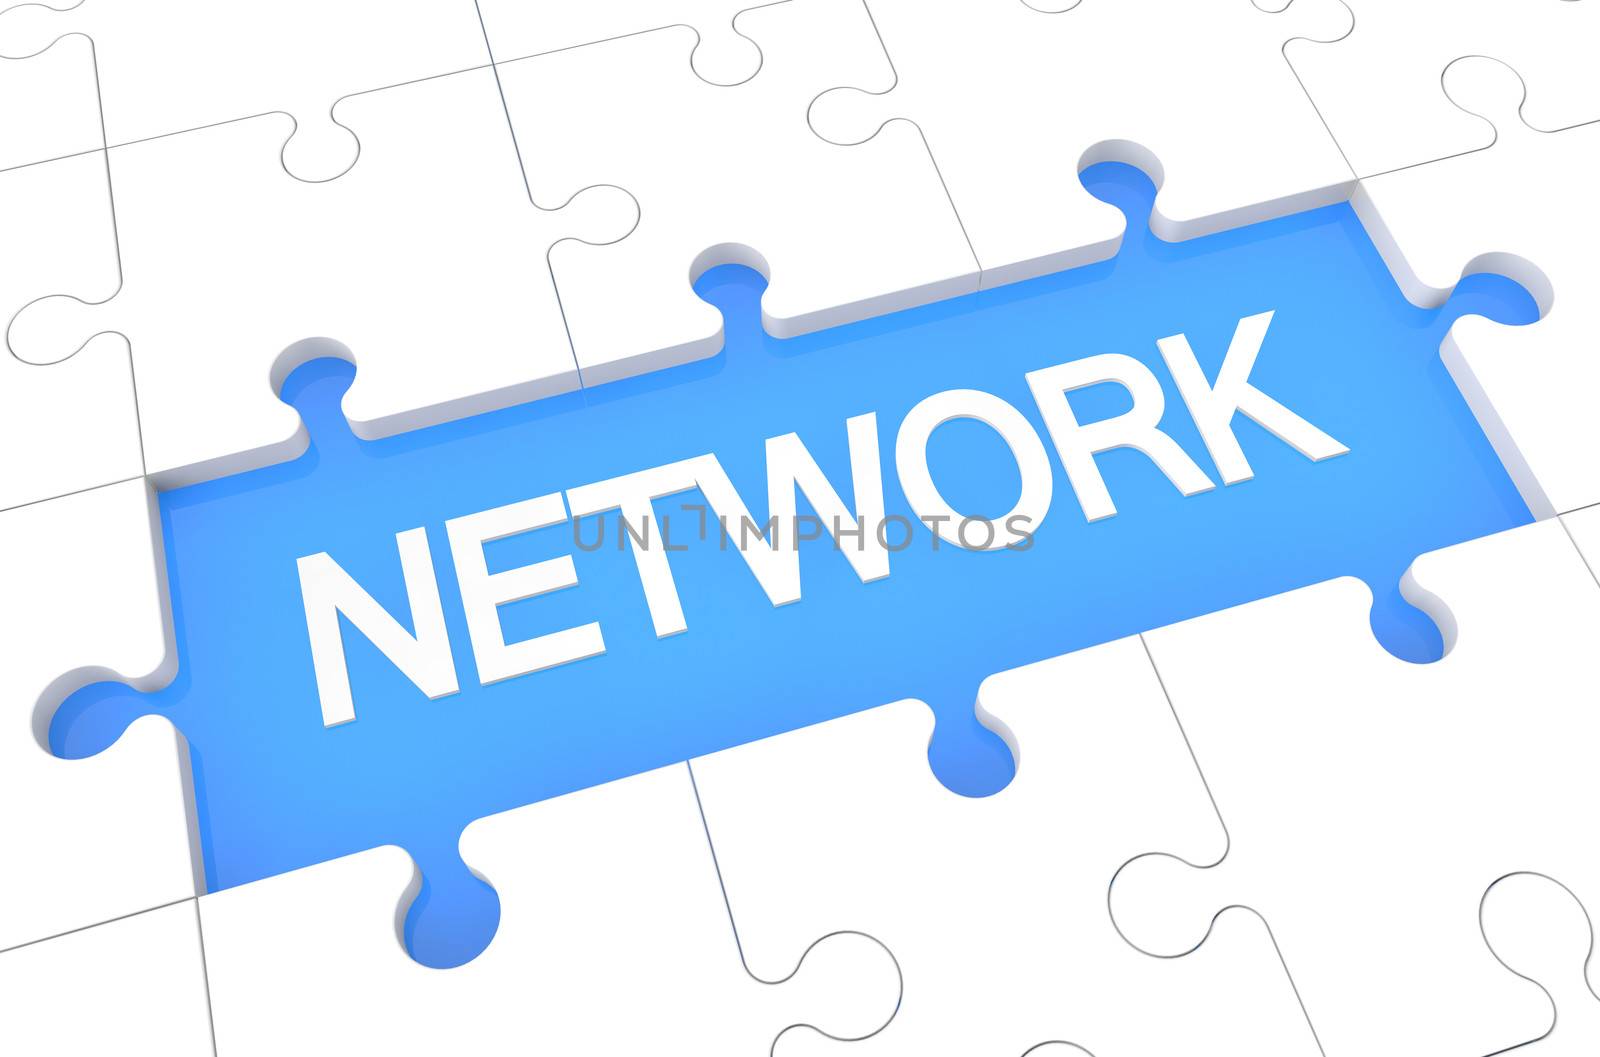 Network - puzzle 3d render illustration with word on blue background